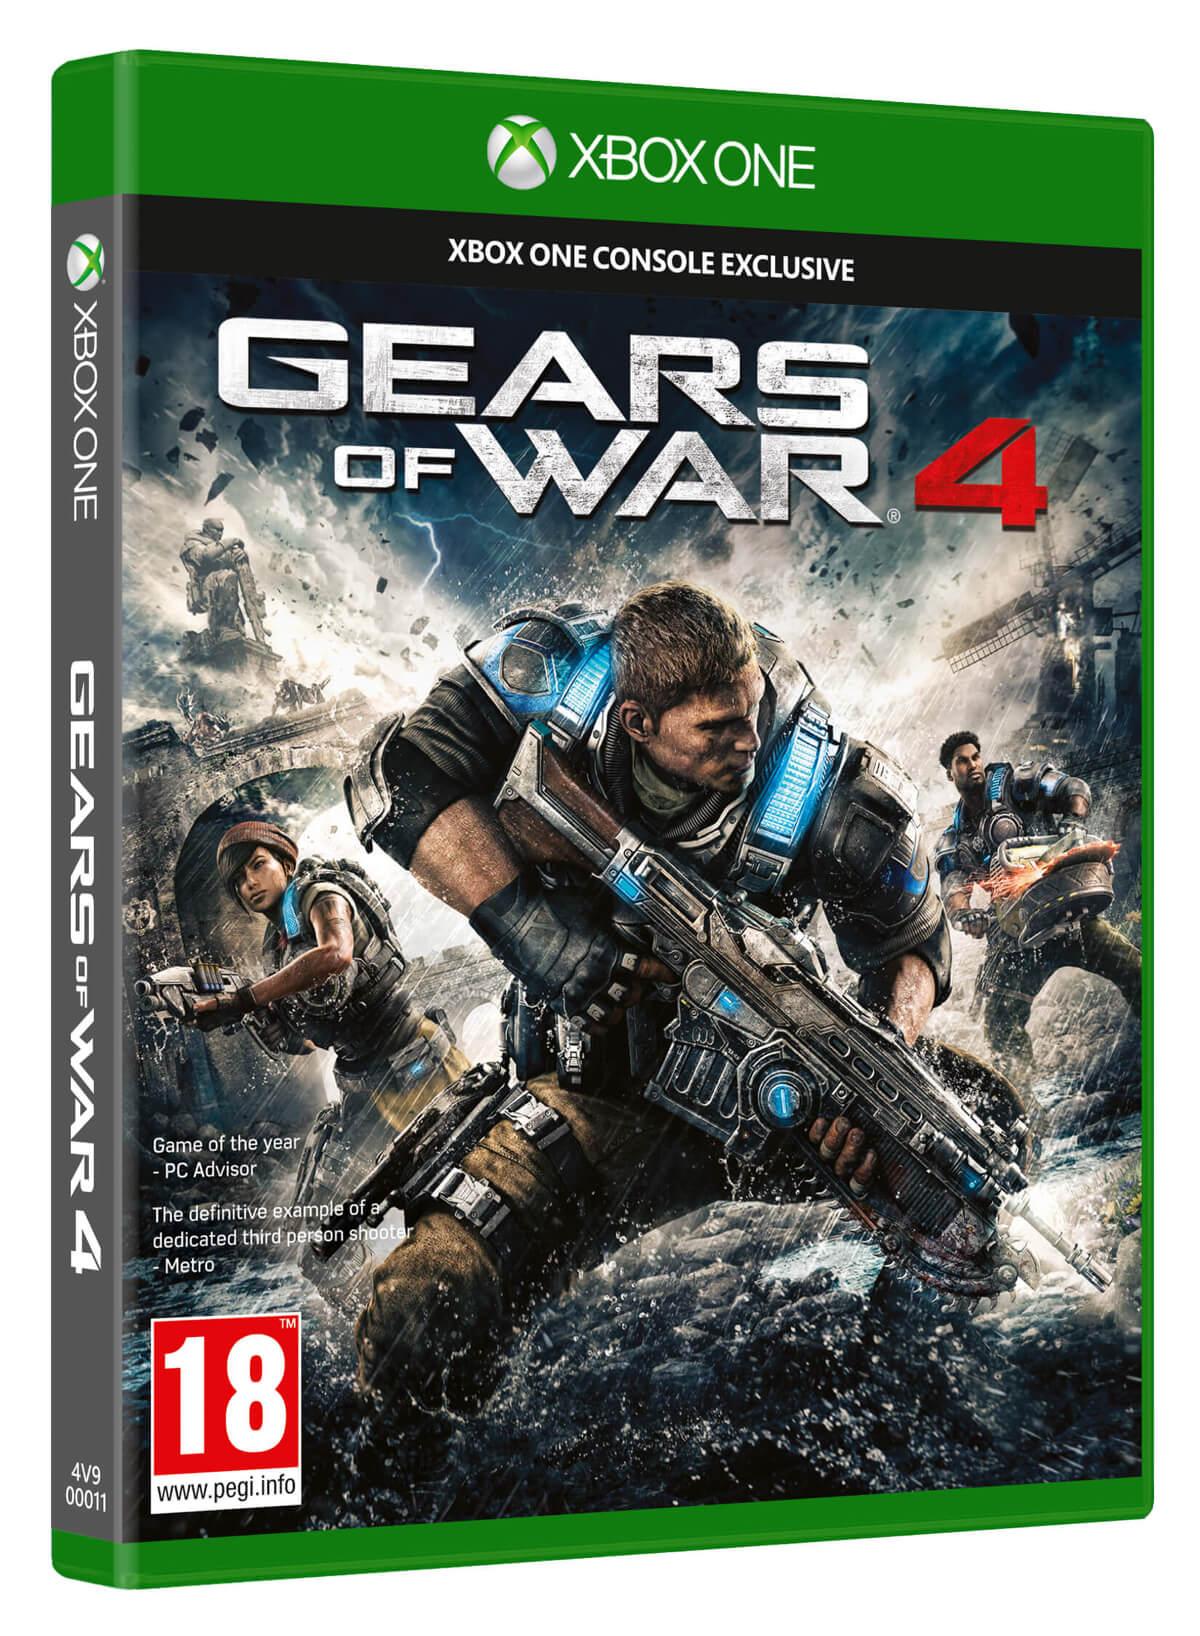 [Xbox GAMES] Gears of War 4 (Xbox One X)